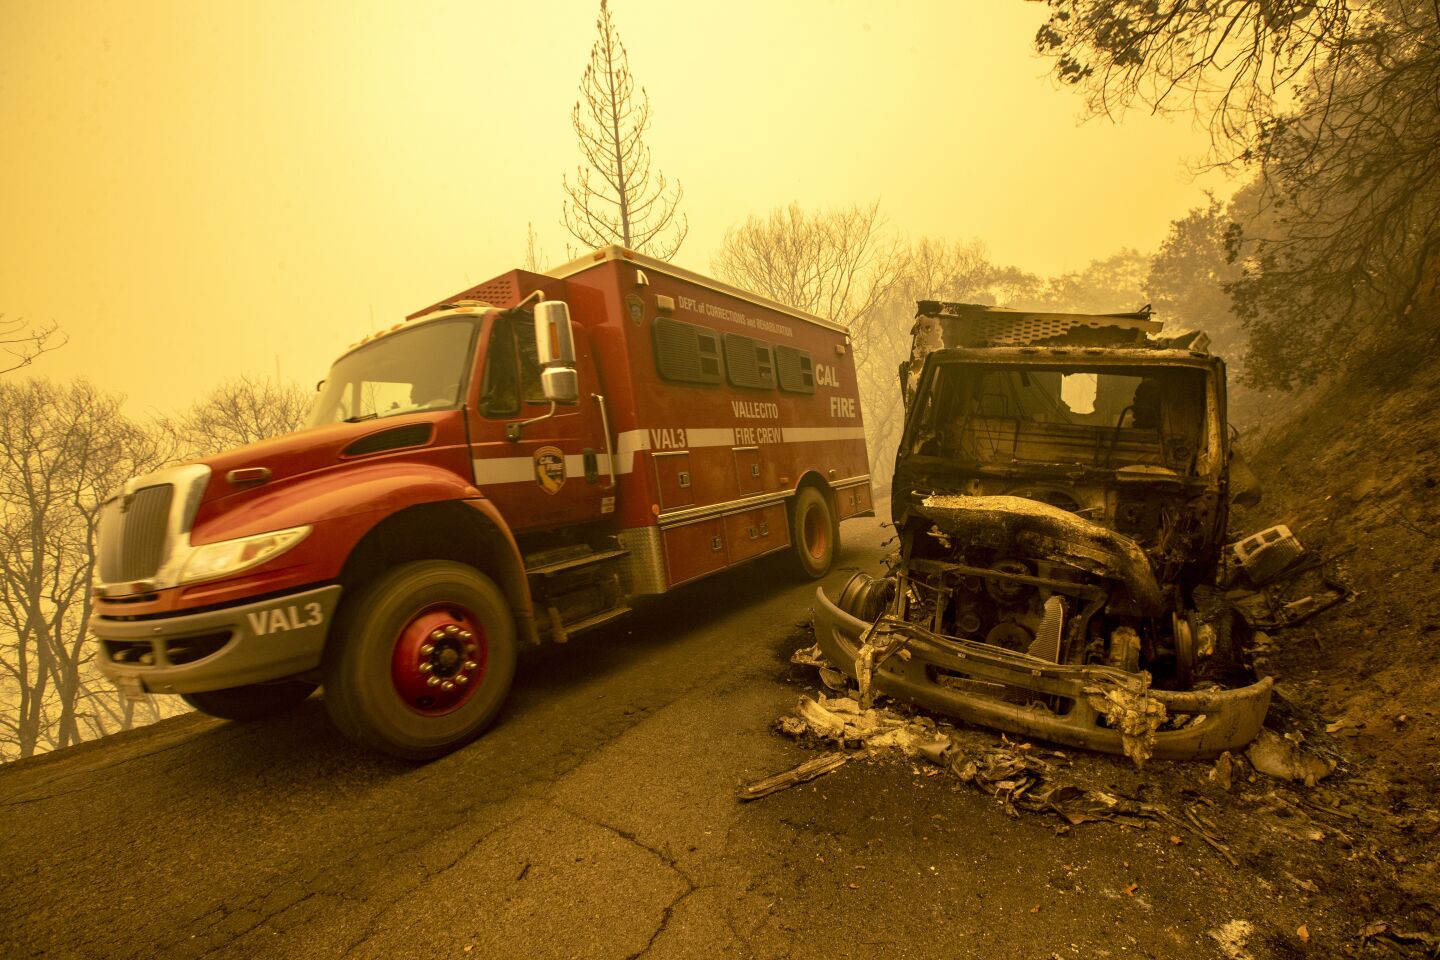 A red fire truck drives past the burned-out ruins of another vehicle on a road amid an orange, smoky haze.